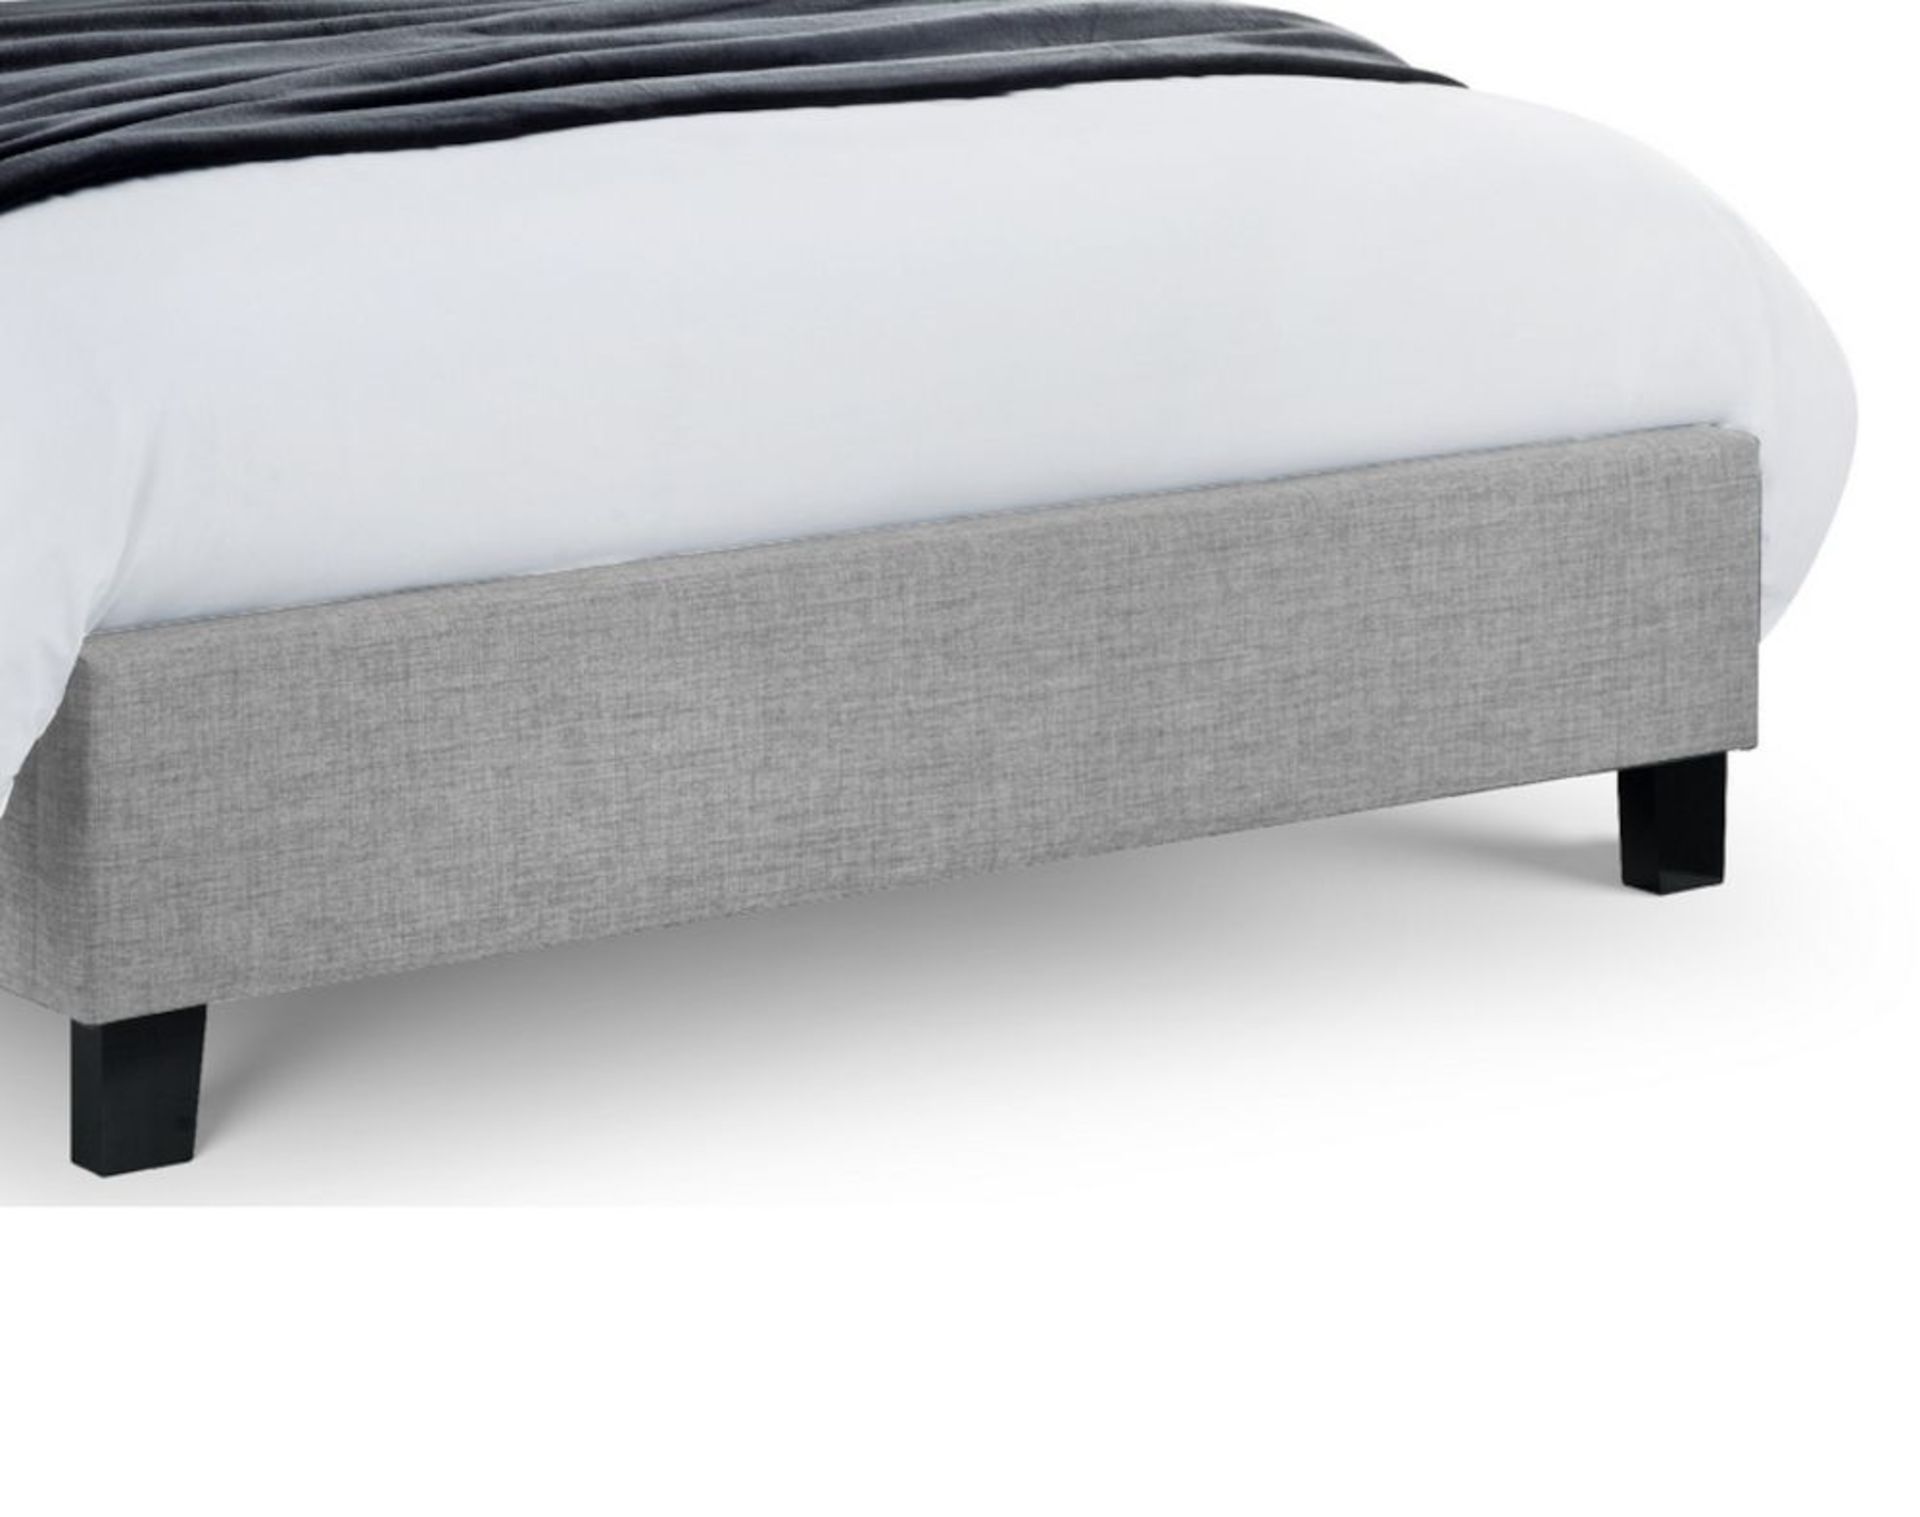 A1 PRODUCT NEW - JULIAN BOWEN SORRENTO HIGH HEADBOARDED BED IN LIGHT GREY - KING SIZE - RRP Ã‚Â£569 - Image 4 of 5